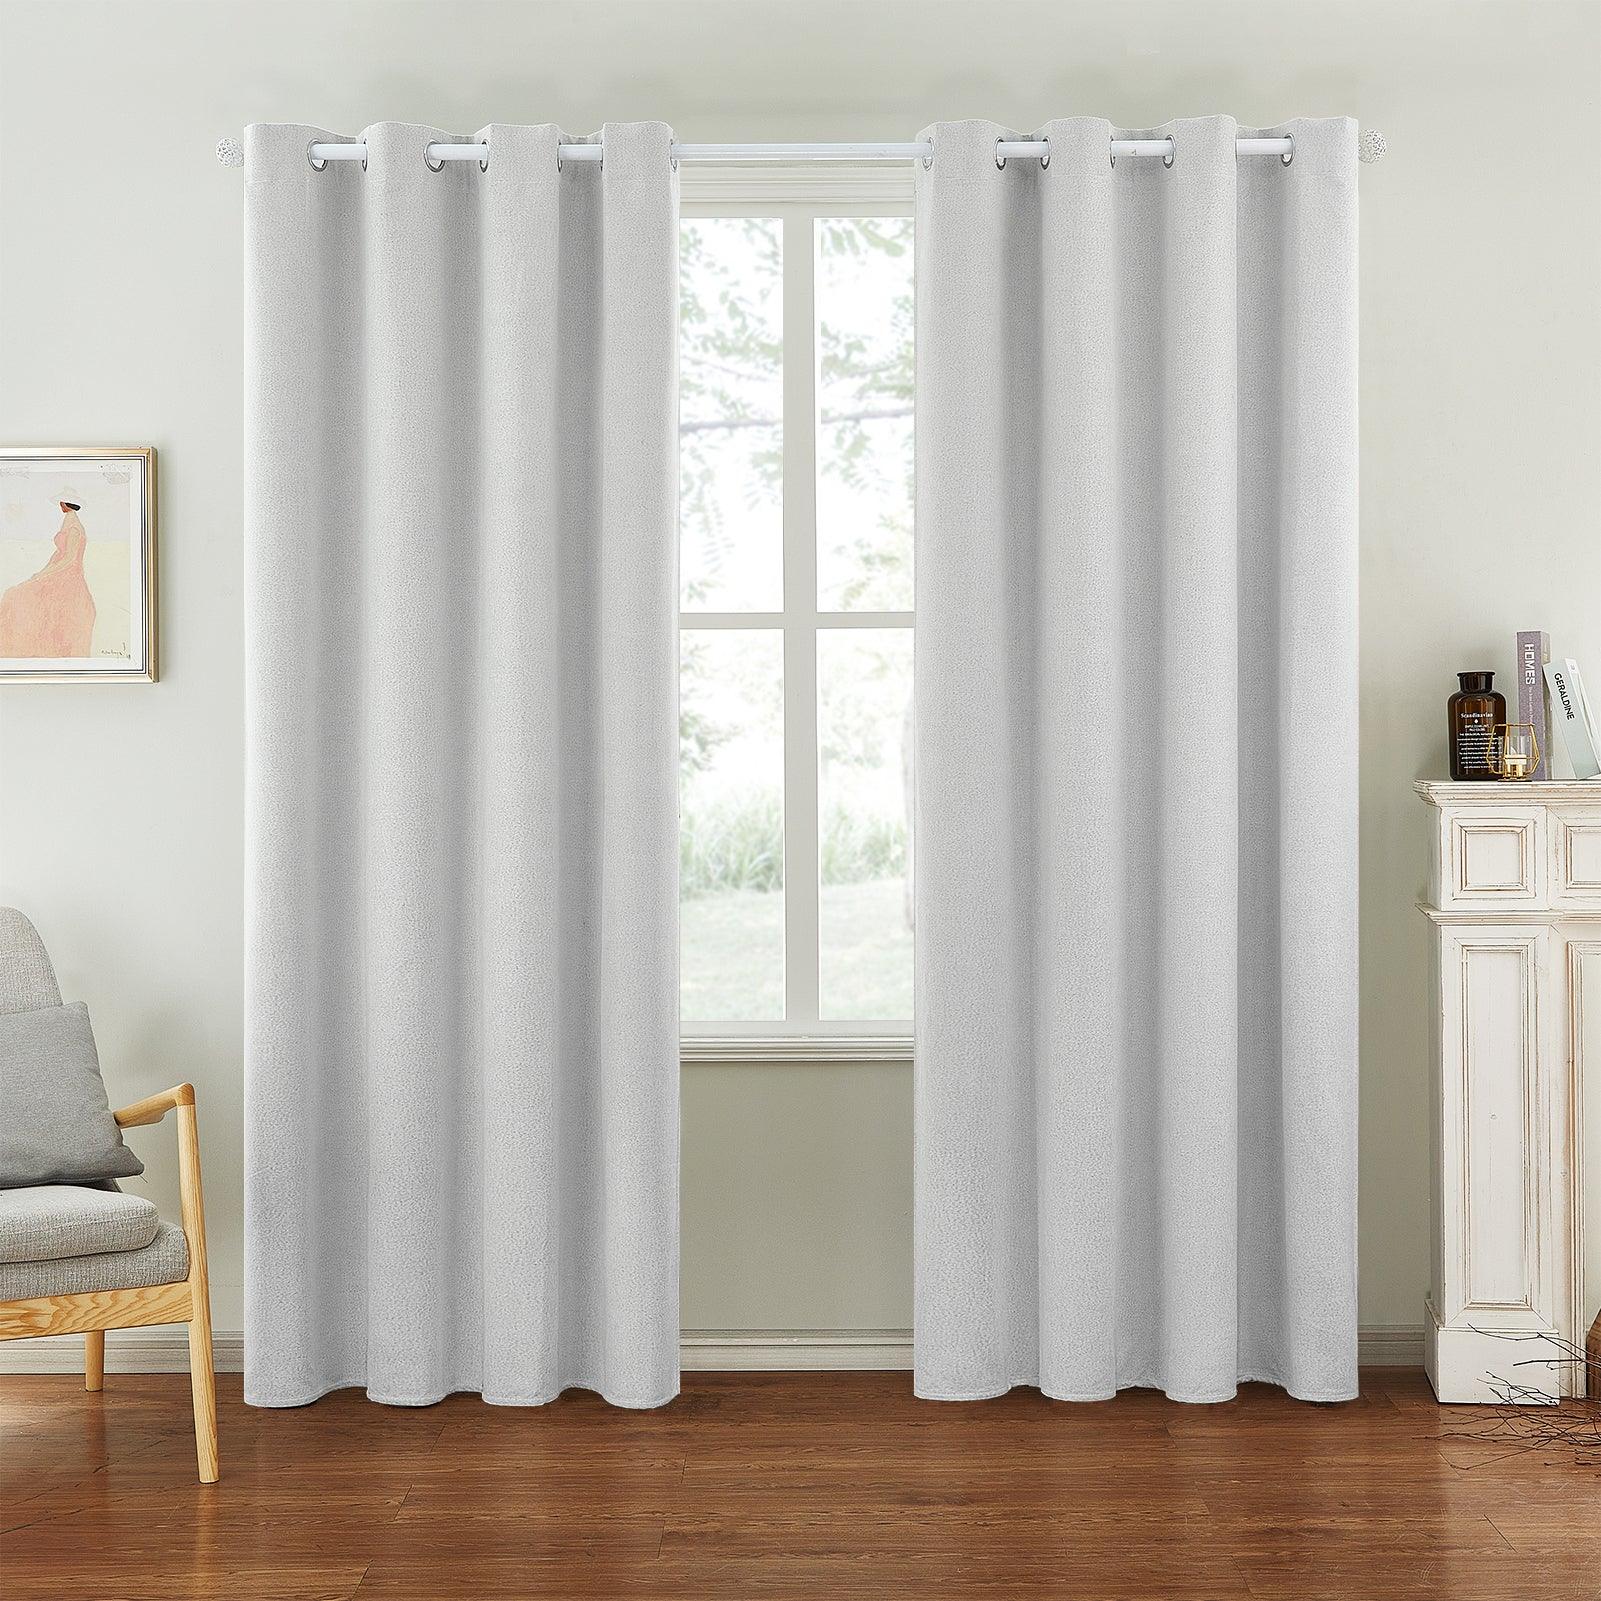 Topfinel Modern Solid Thermal Insulated Window drapes，Blackout curtains For Bedroom With Eyelets - Topfinel